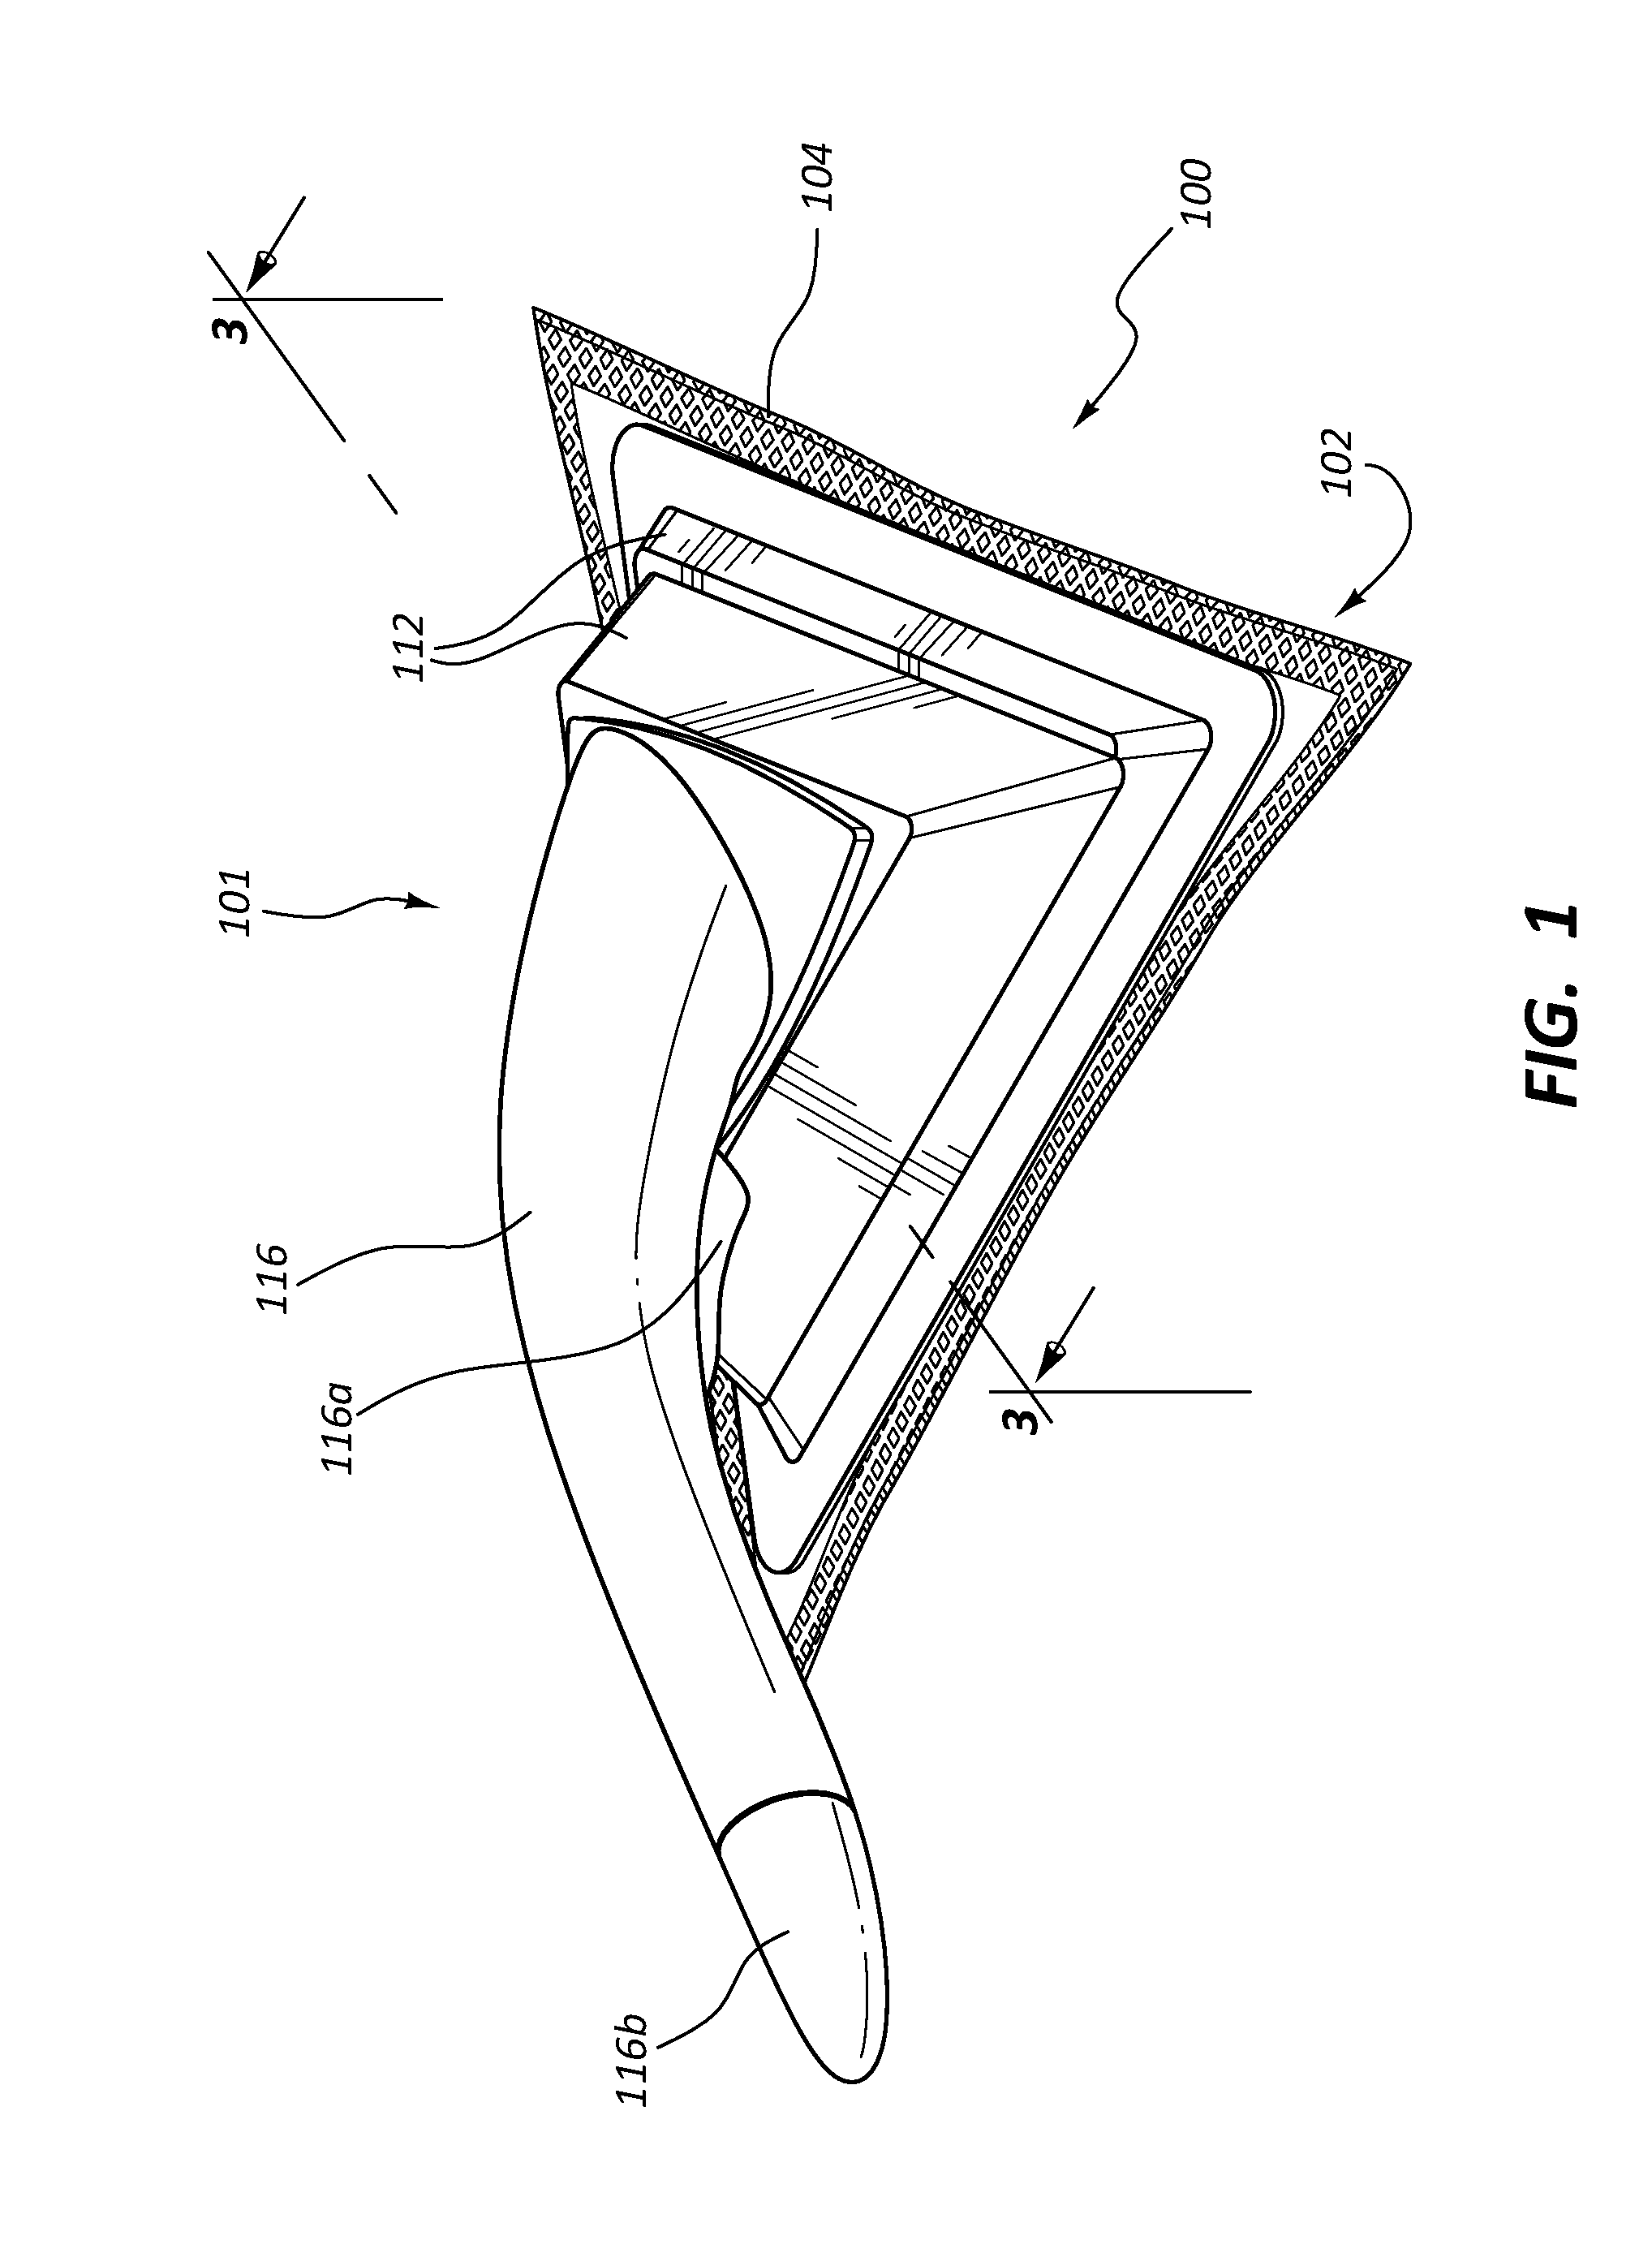 Heated cleaning articles using a reactive metal and saline heat generator